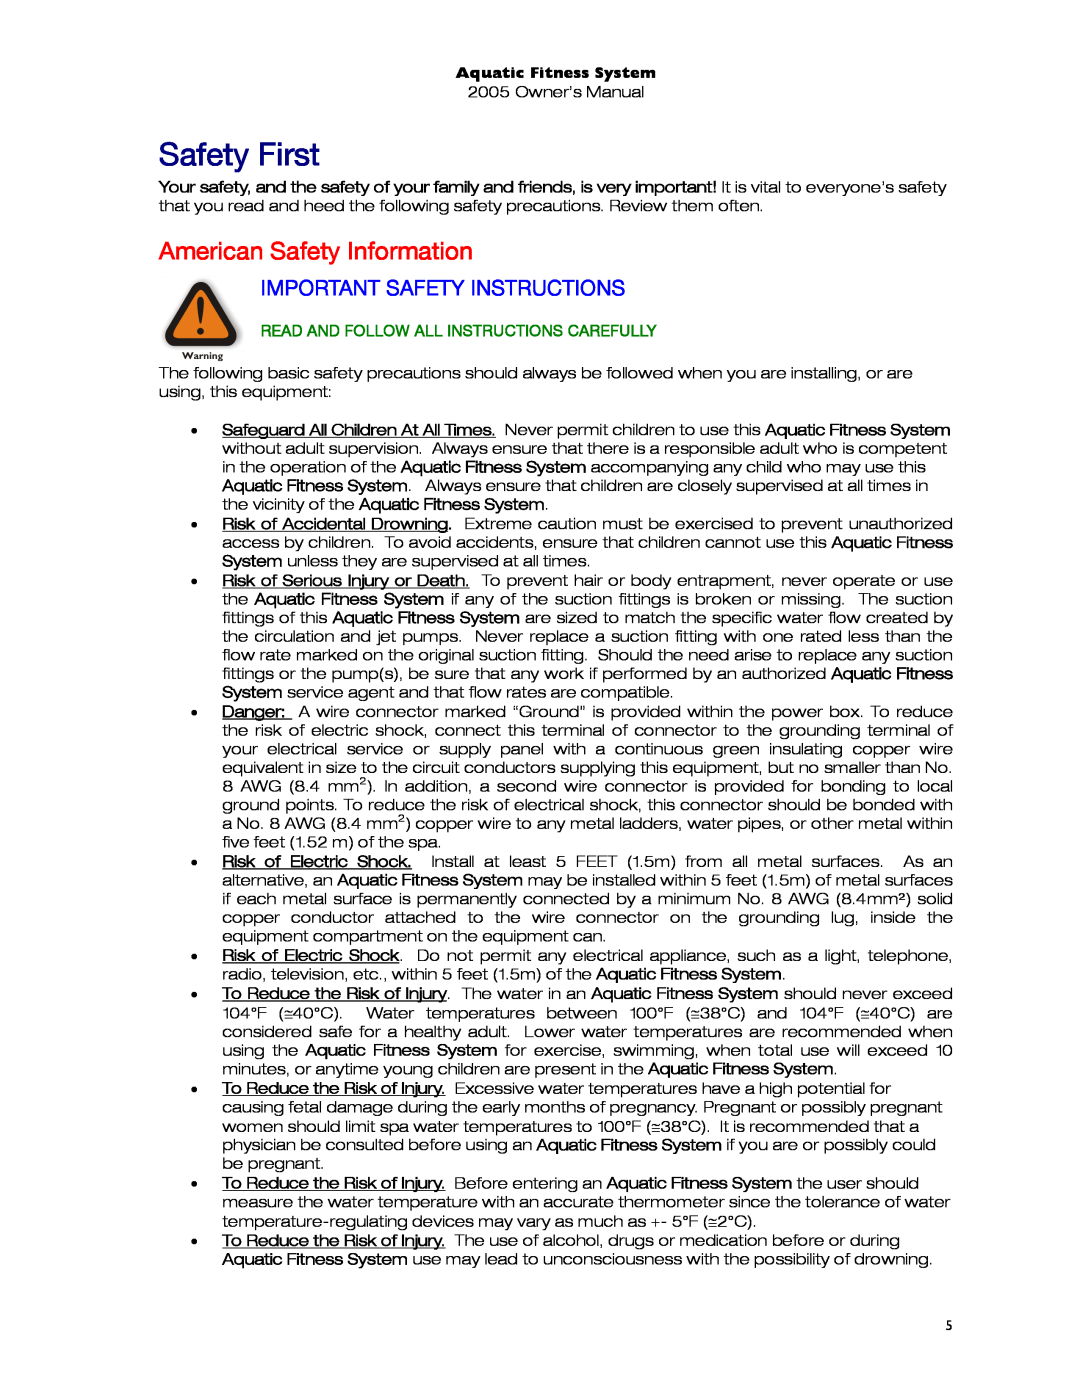 Dimension One Spas 01513-192 manual Safety First, American Safety Information, Important Safety Instructions 